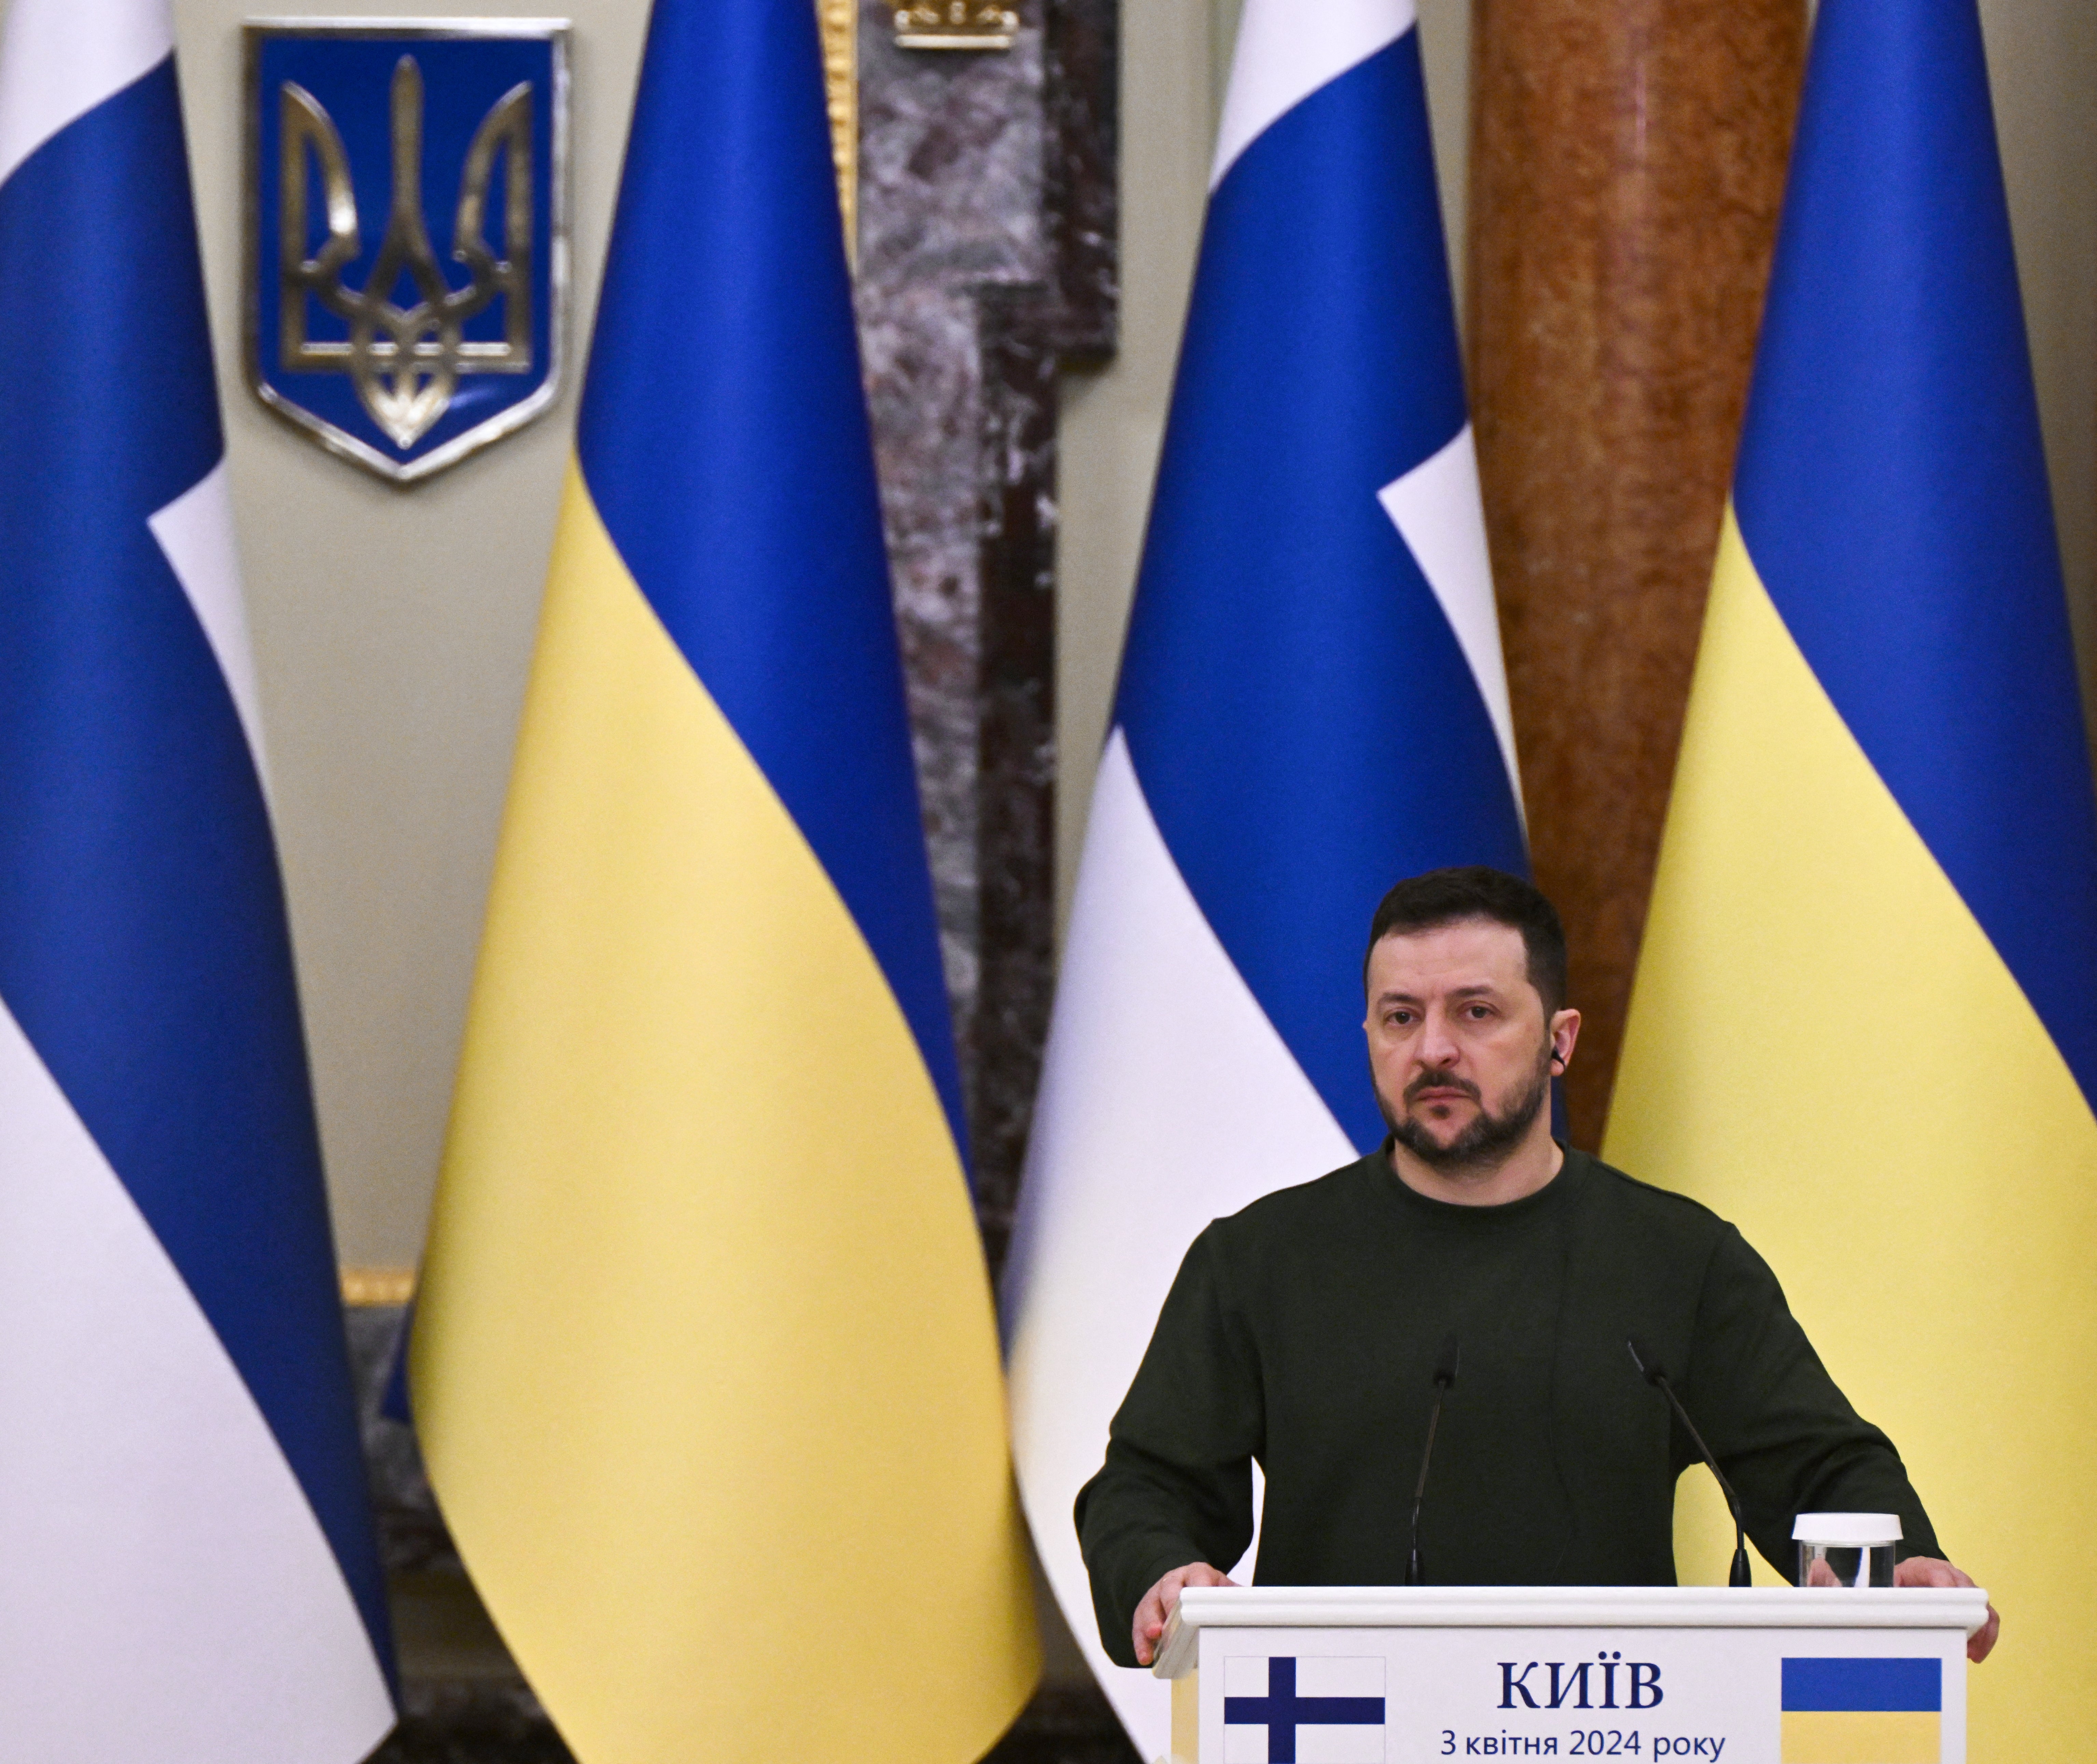 President of Ukraine Volodymyr Zelensky looks on during a joint press conference with president of Finland following their meeting in Kyiv on 3 April 2024, amid the Russian invasion of Ukraine